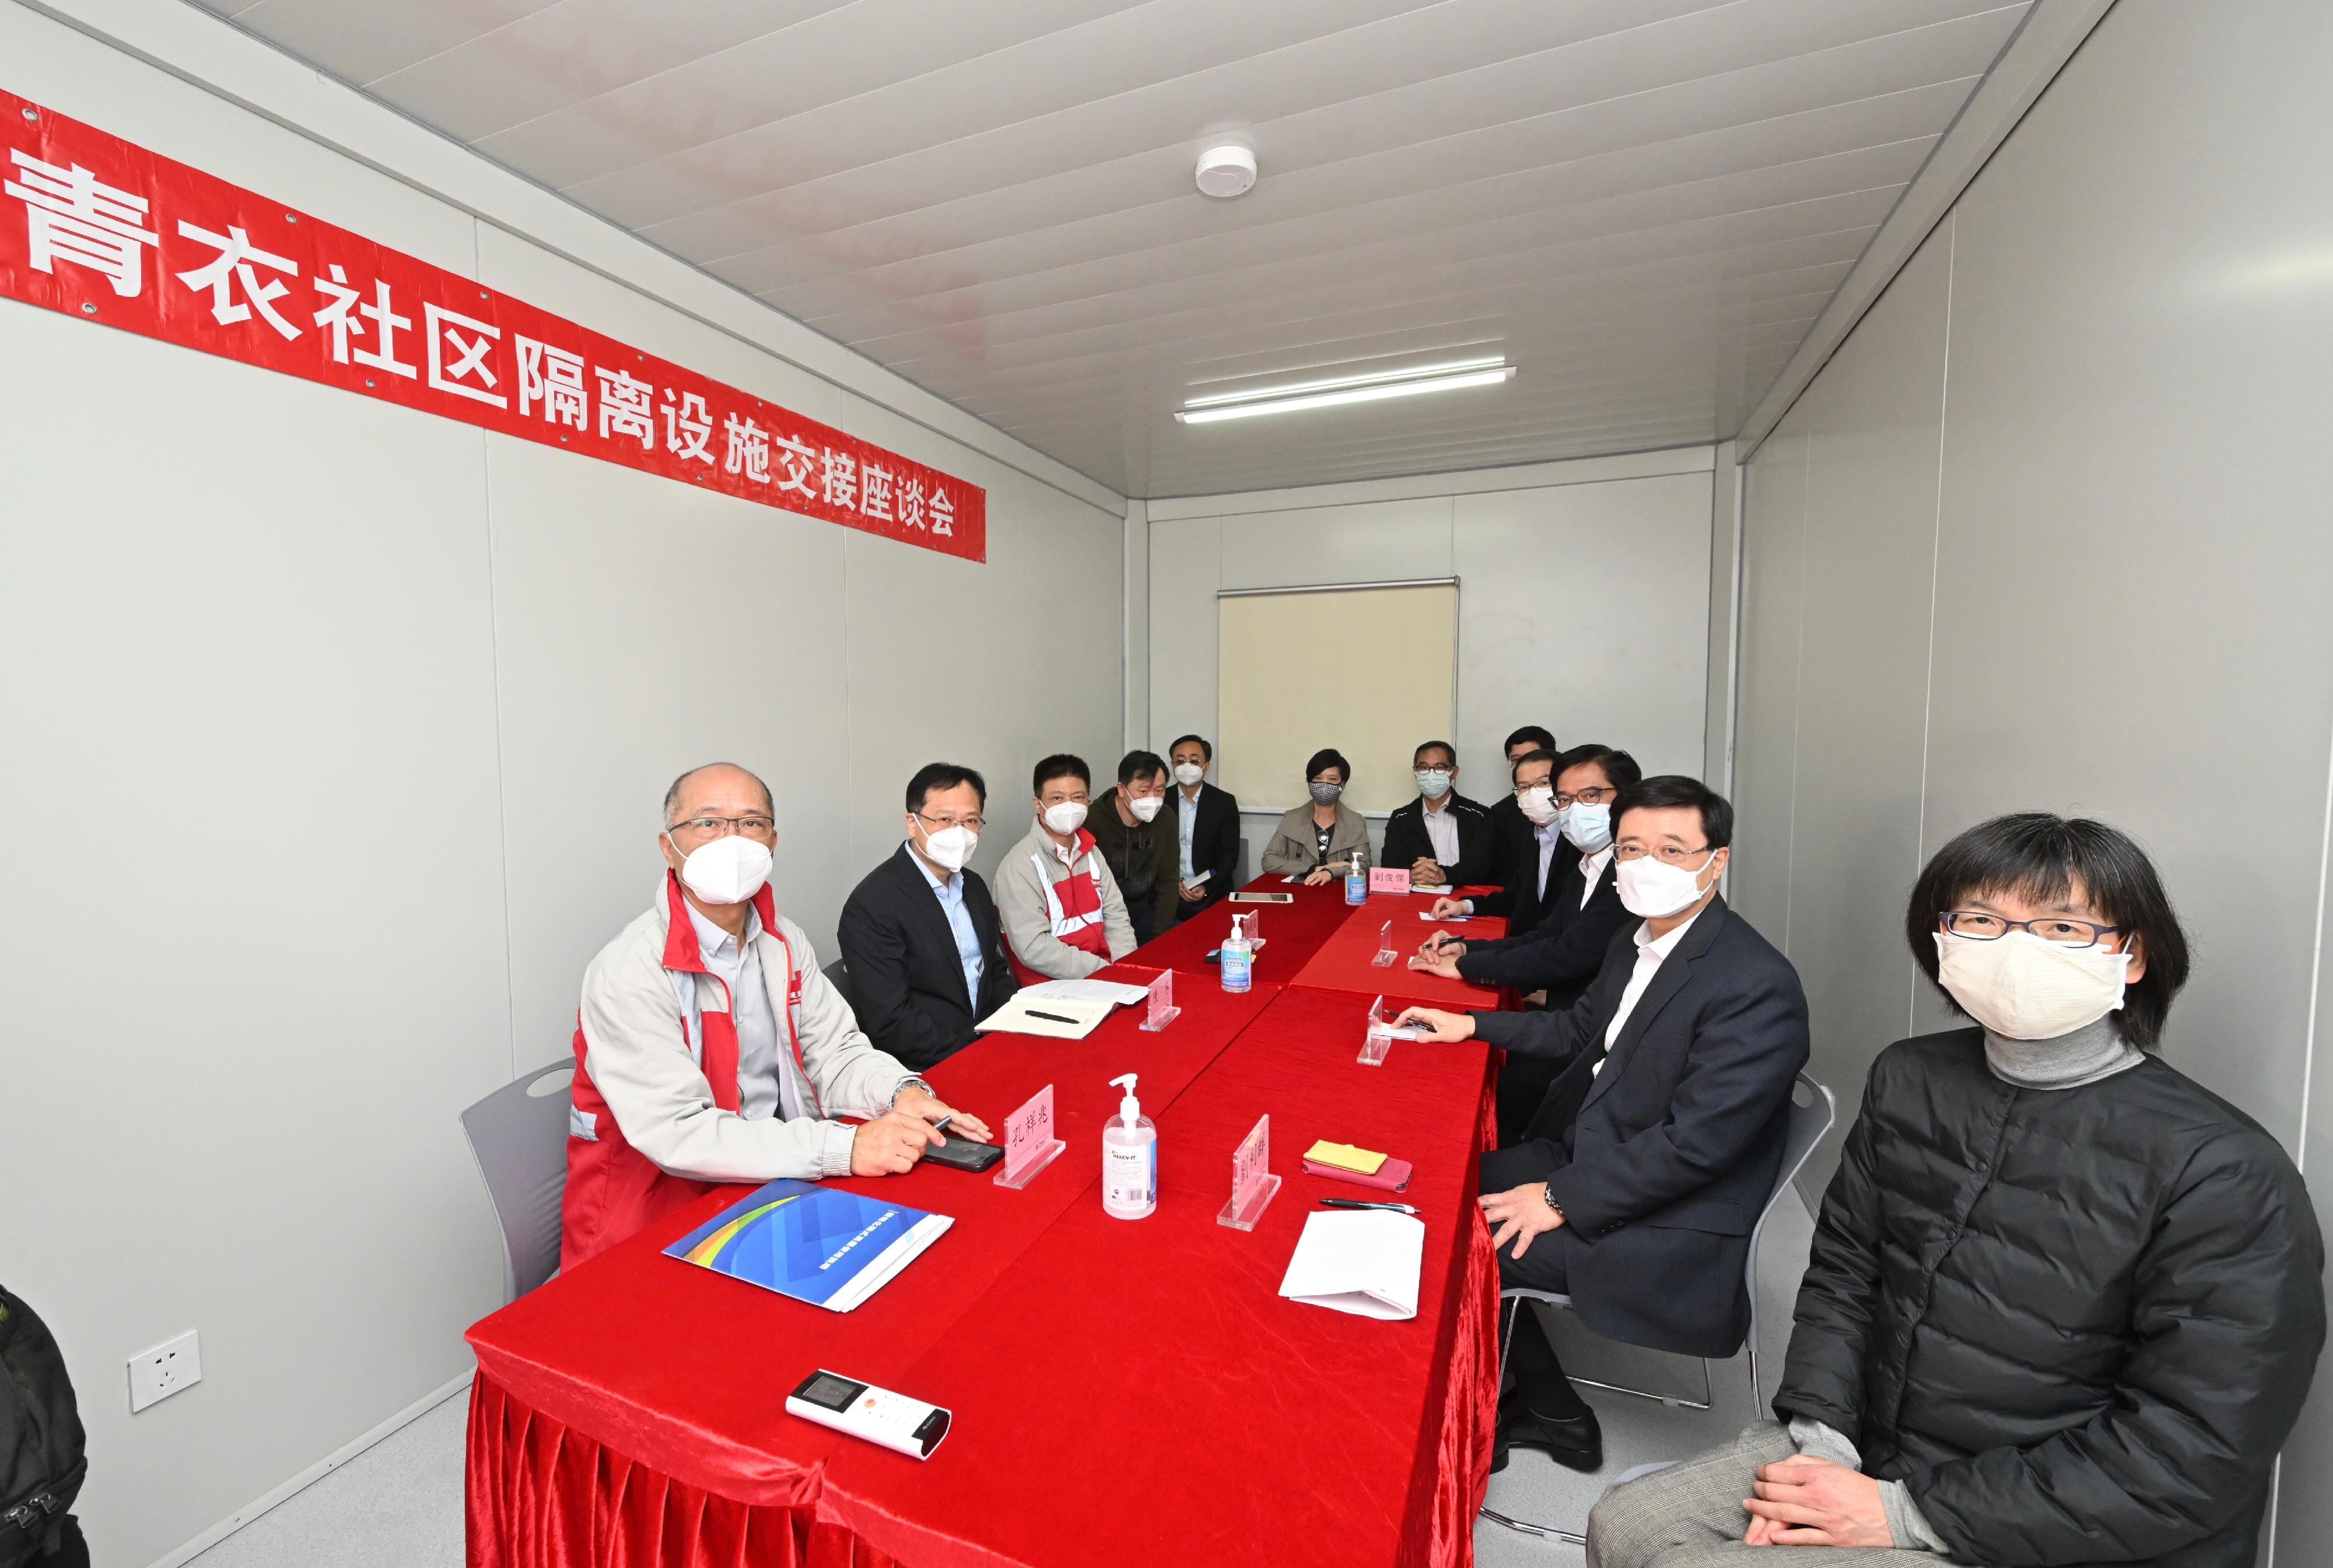 The Chief Secretary for Administration, Mr John Lee, today (March 1) visited the community isolation facilities constructed with the support of the Central Government in Tsing Yi. Photo Shows Mr Lee (second right); Deputy Director of the Liaison Office of the Central People's Government in the Hong Kong Special Administrative Region Mr Chen Dong (second left); and the Chairman and Non-executive Director of the China State Construction International Holdings Limited, Mr Yan Jianguo (third left), in a hand over meeting before visiting the facilities. Other attendees included the Secretary for Development, Mr Michael Wong (third right); the Permanent Secretary for Food and Health (Food), Miss Vivian Lau (first right); and the Under Secretary for Security, Mr Sonny Au (fourth right).